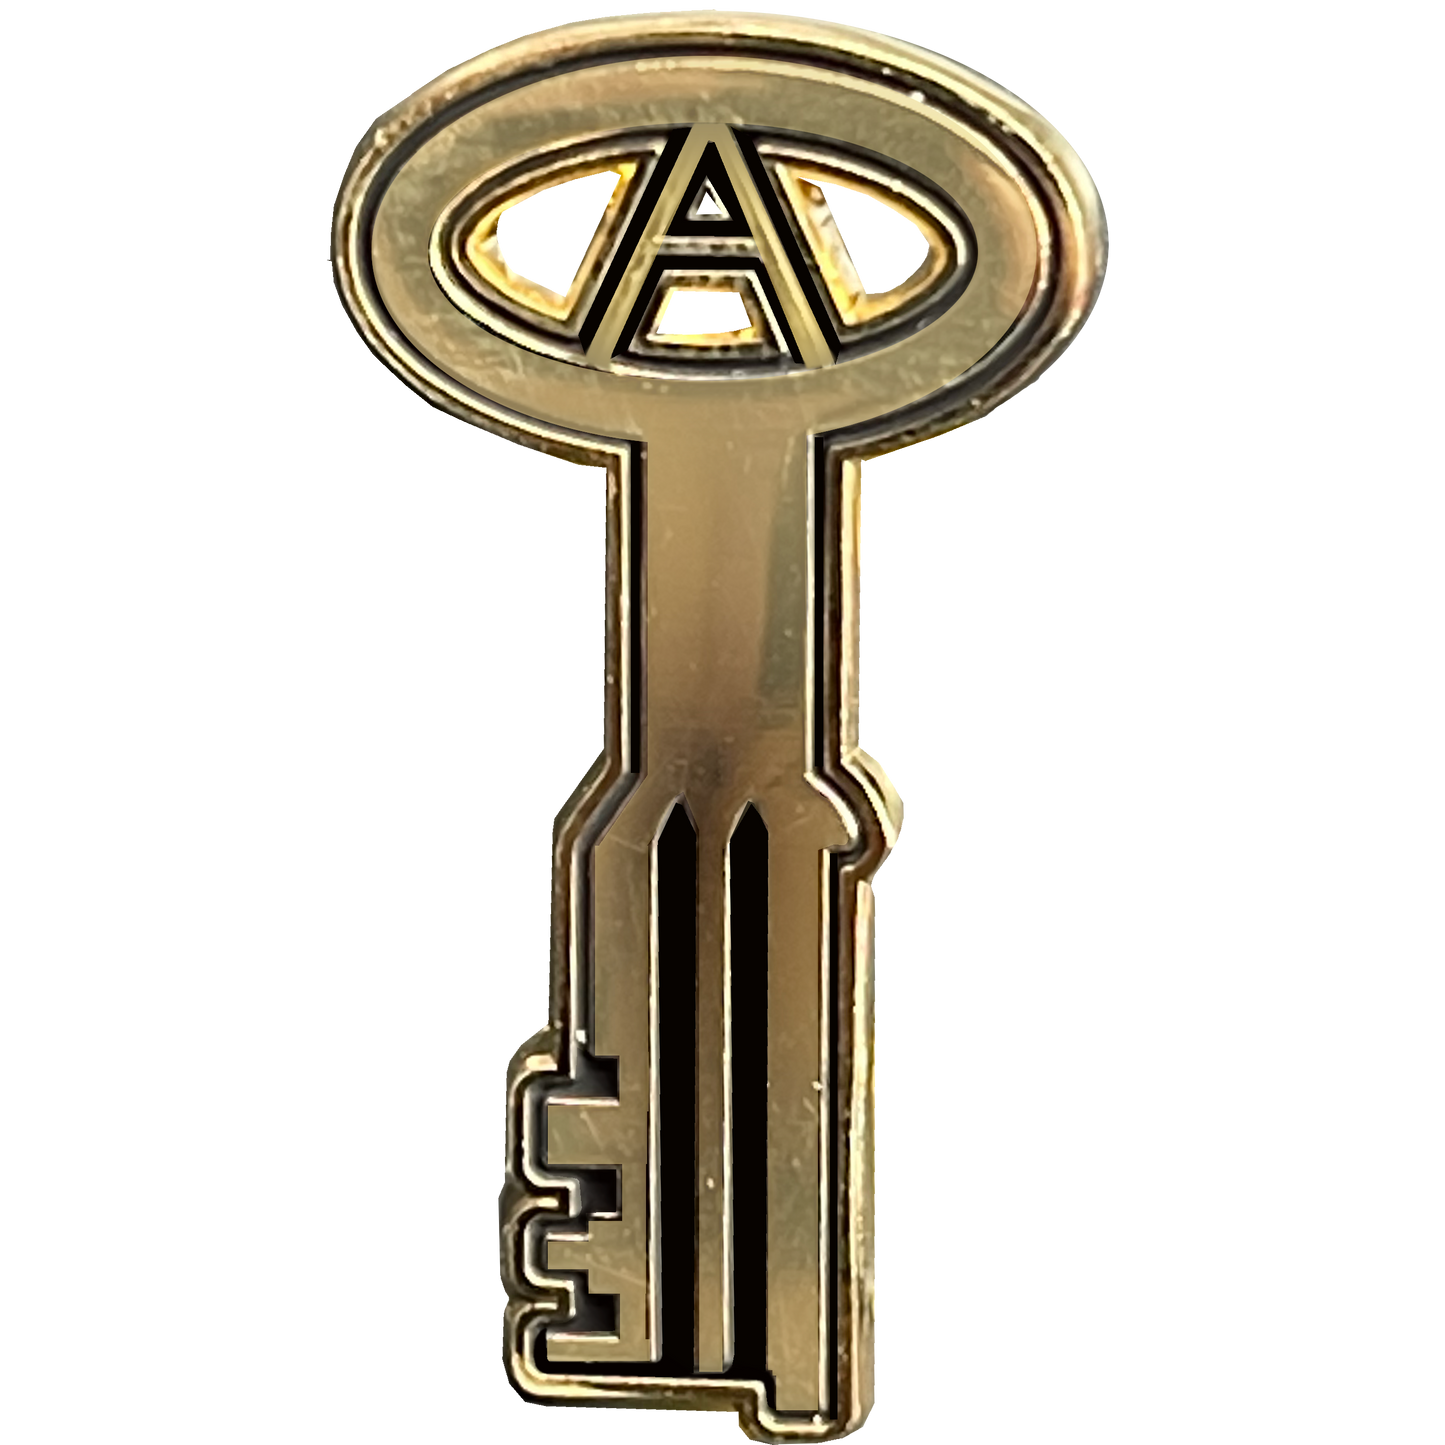 BL15-014 24KT Gold plated Correctional Officer Jail Prison Key pin CO Corrections Thin Gray Line